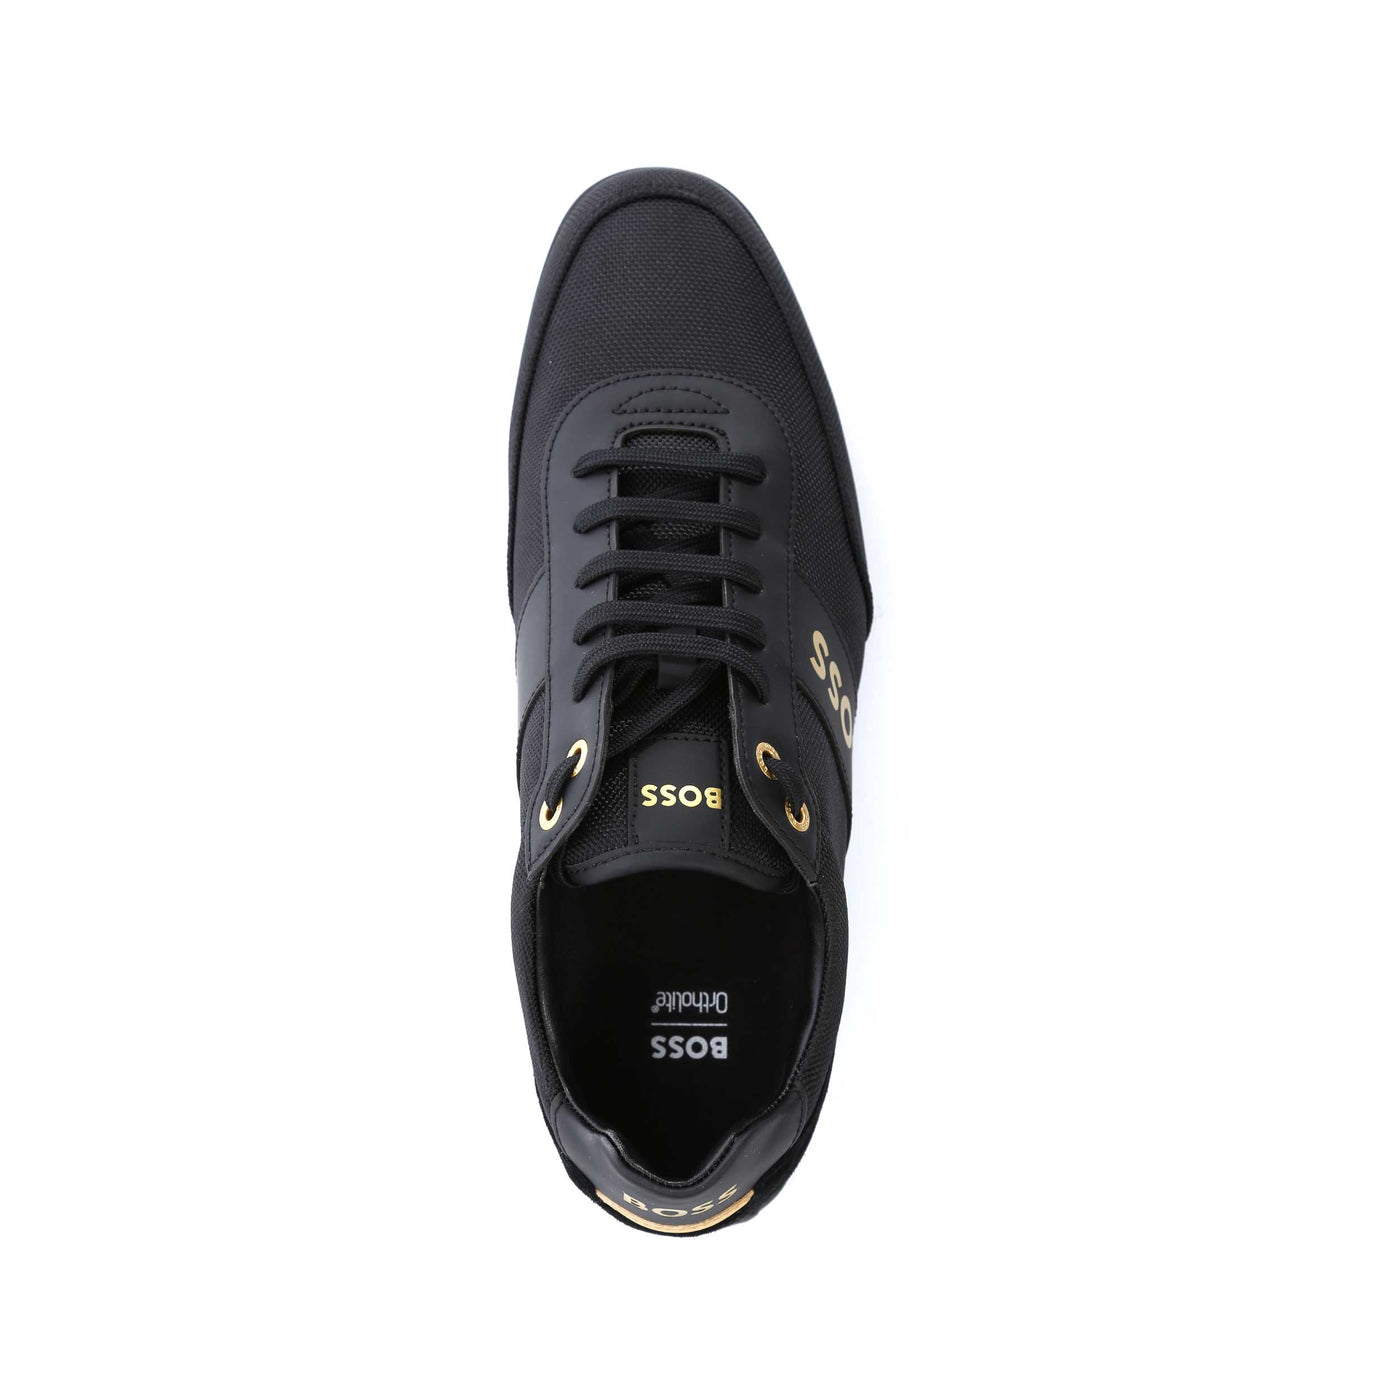 BOSS Saturn Lowp nylg Trainer in Black & Gold